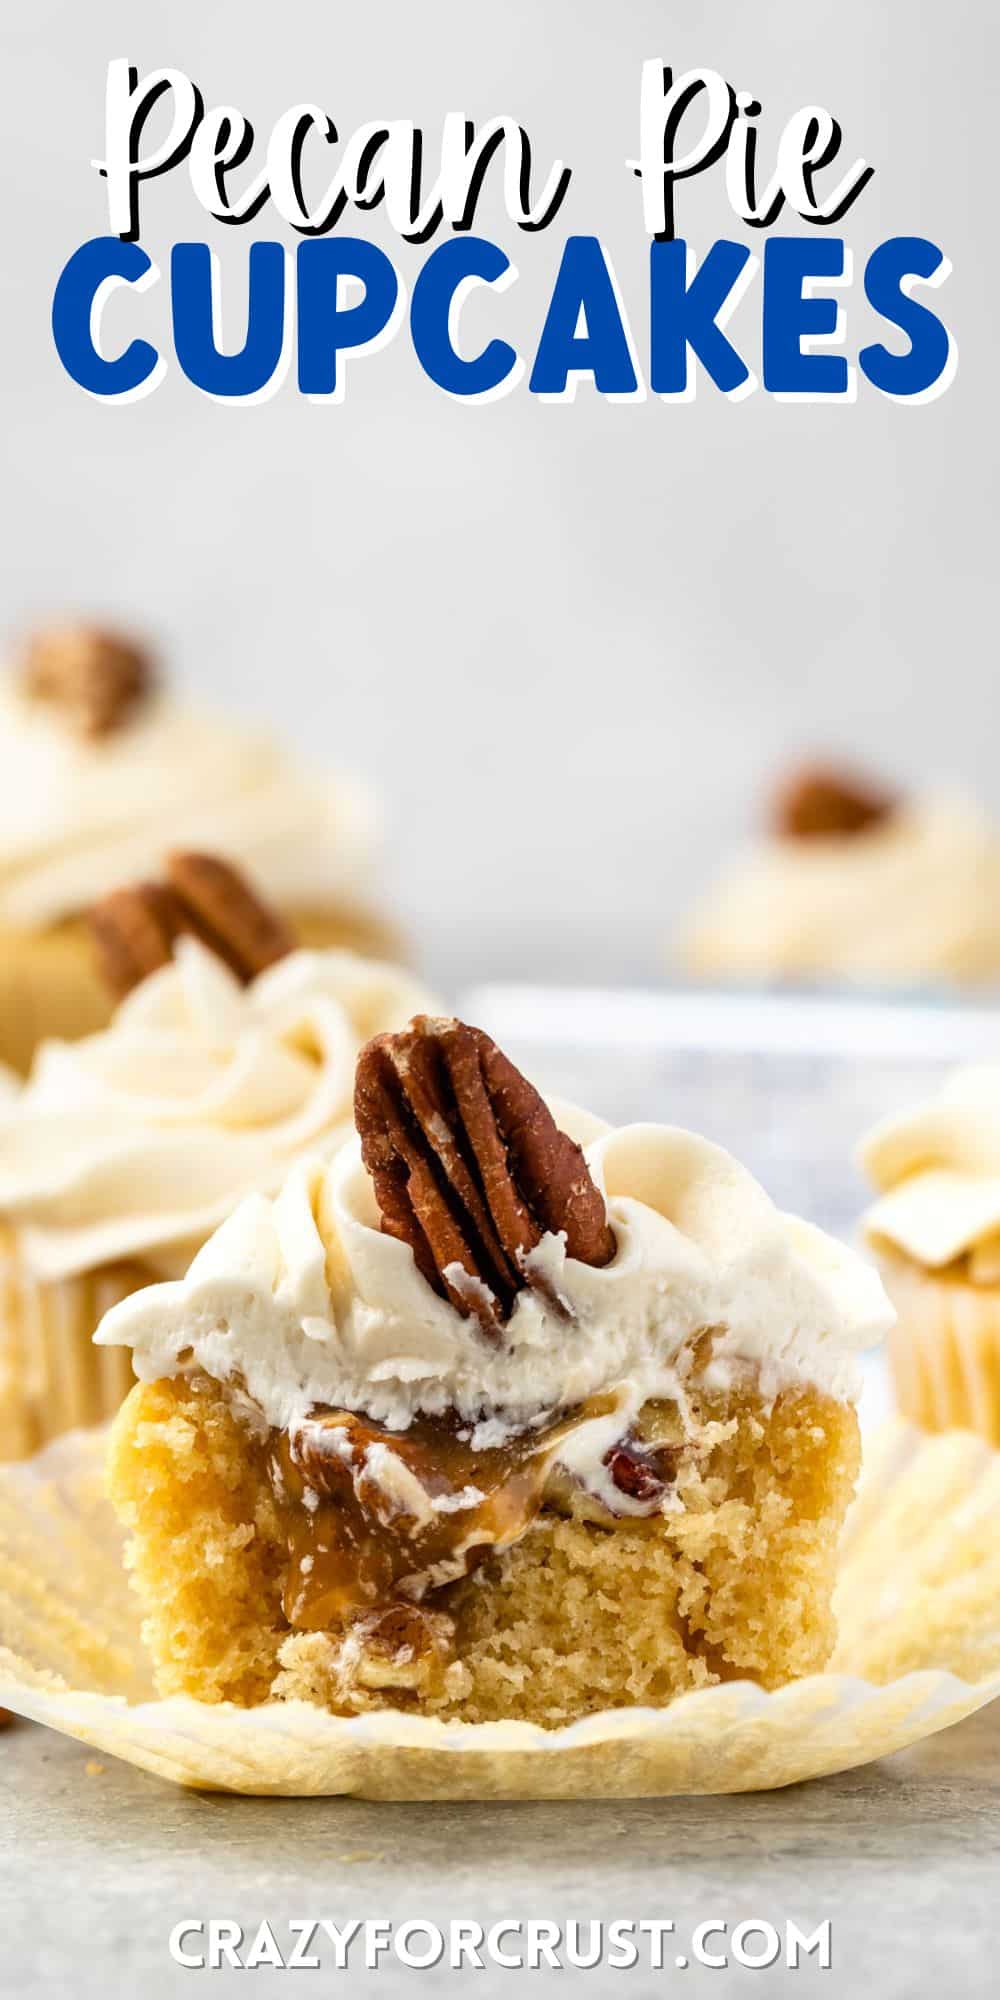 pecan pie cupcakes cut in half with white frosting and a pecan on top with words on the image